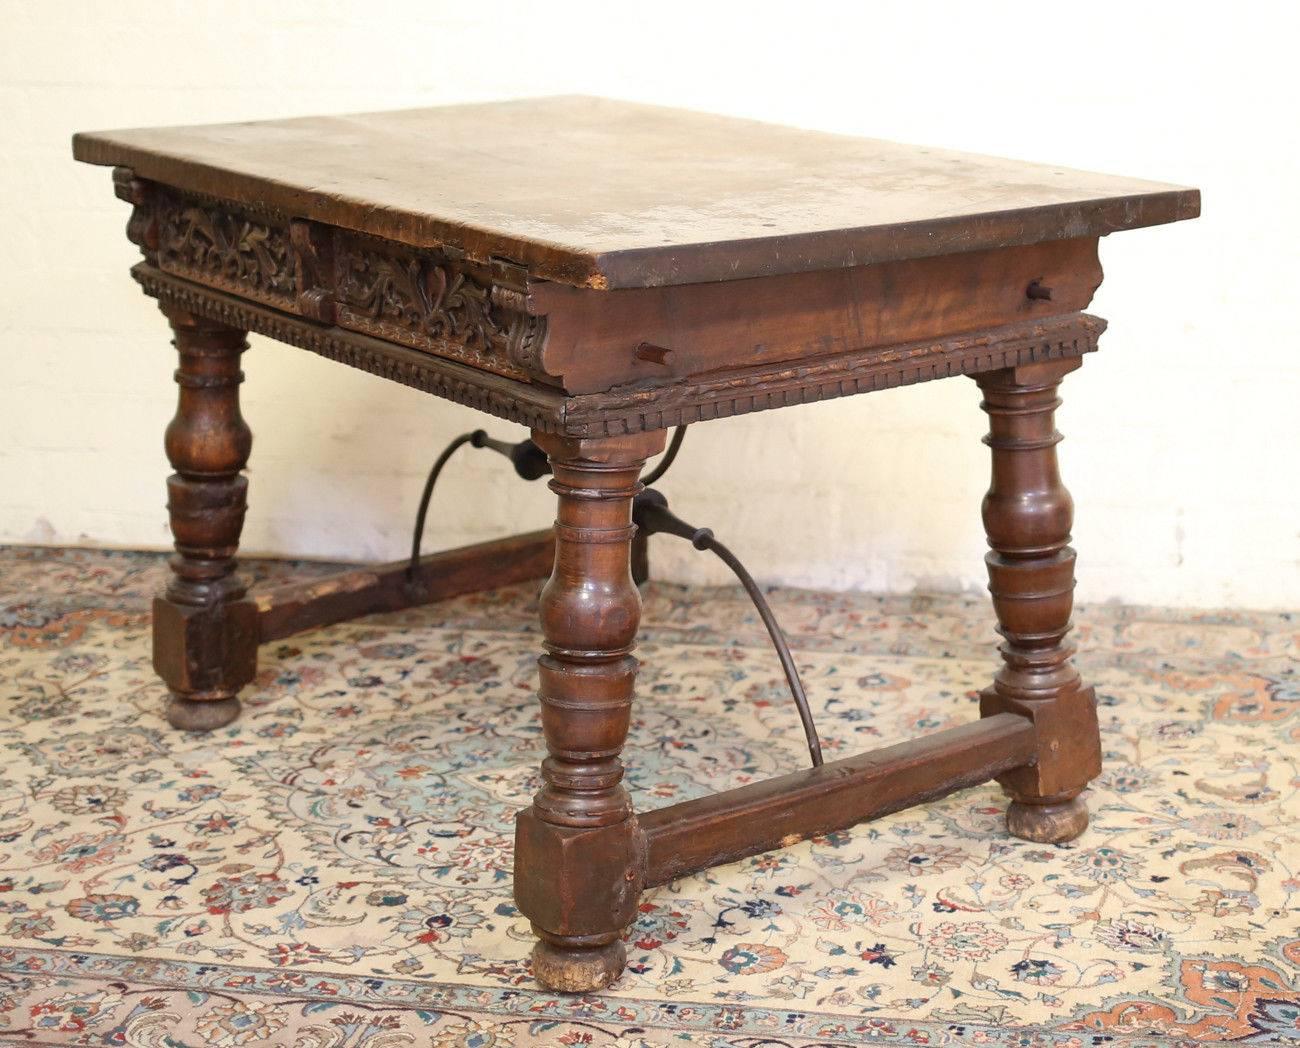 18th century Continental rustic desk (Italian possibly) with iron supports, two drawers, hand-carved details. Baluster turned legs, bun feet. Original finish.